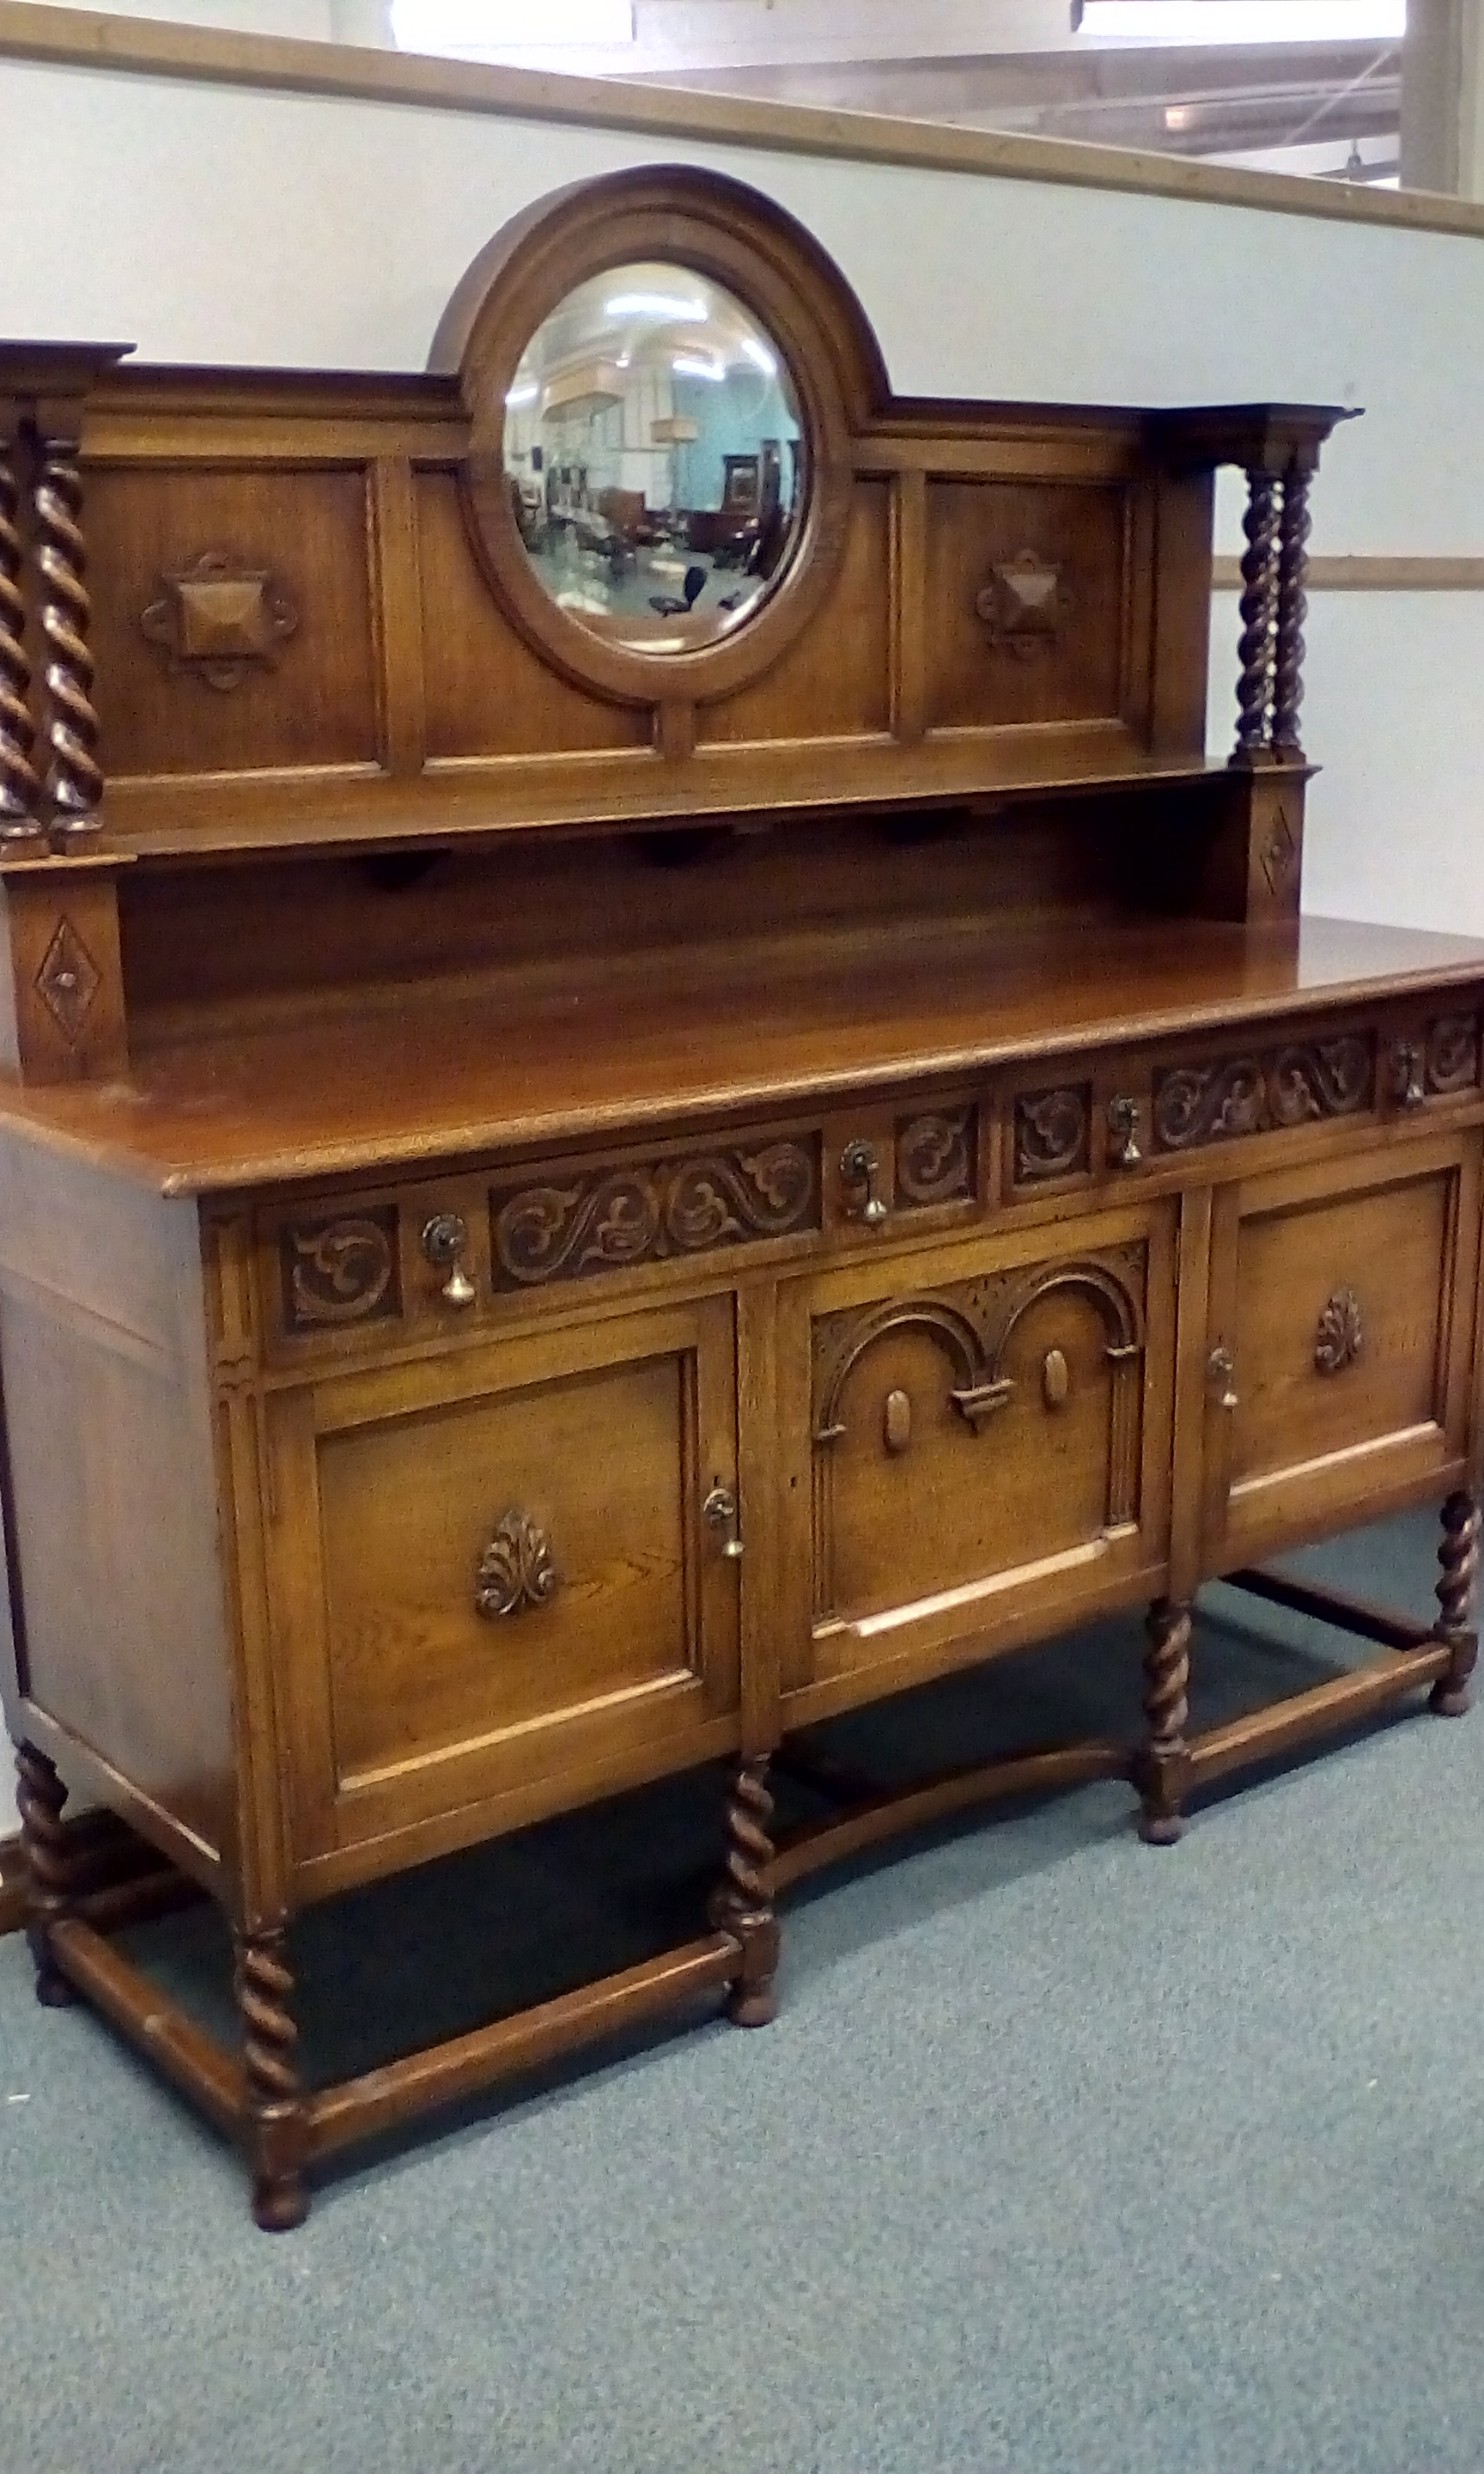 Oak Arts & Crafts style sideboard with carved deco